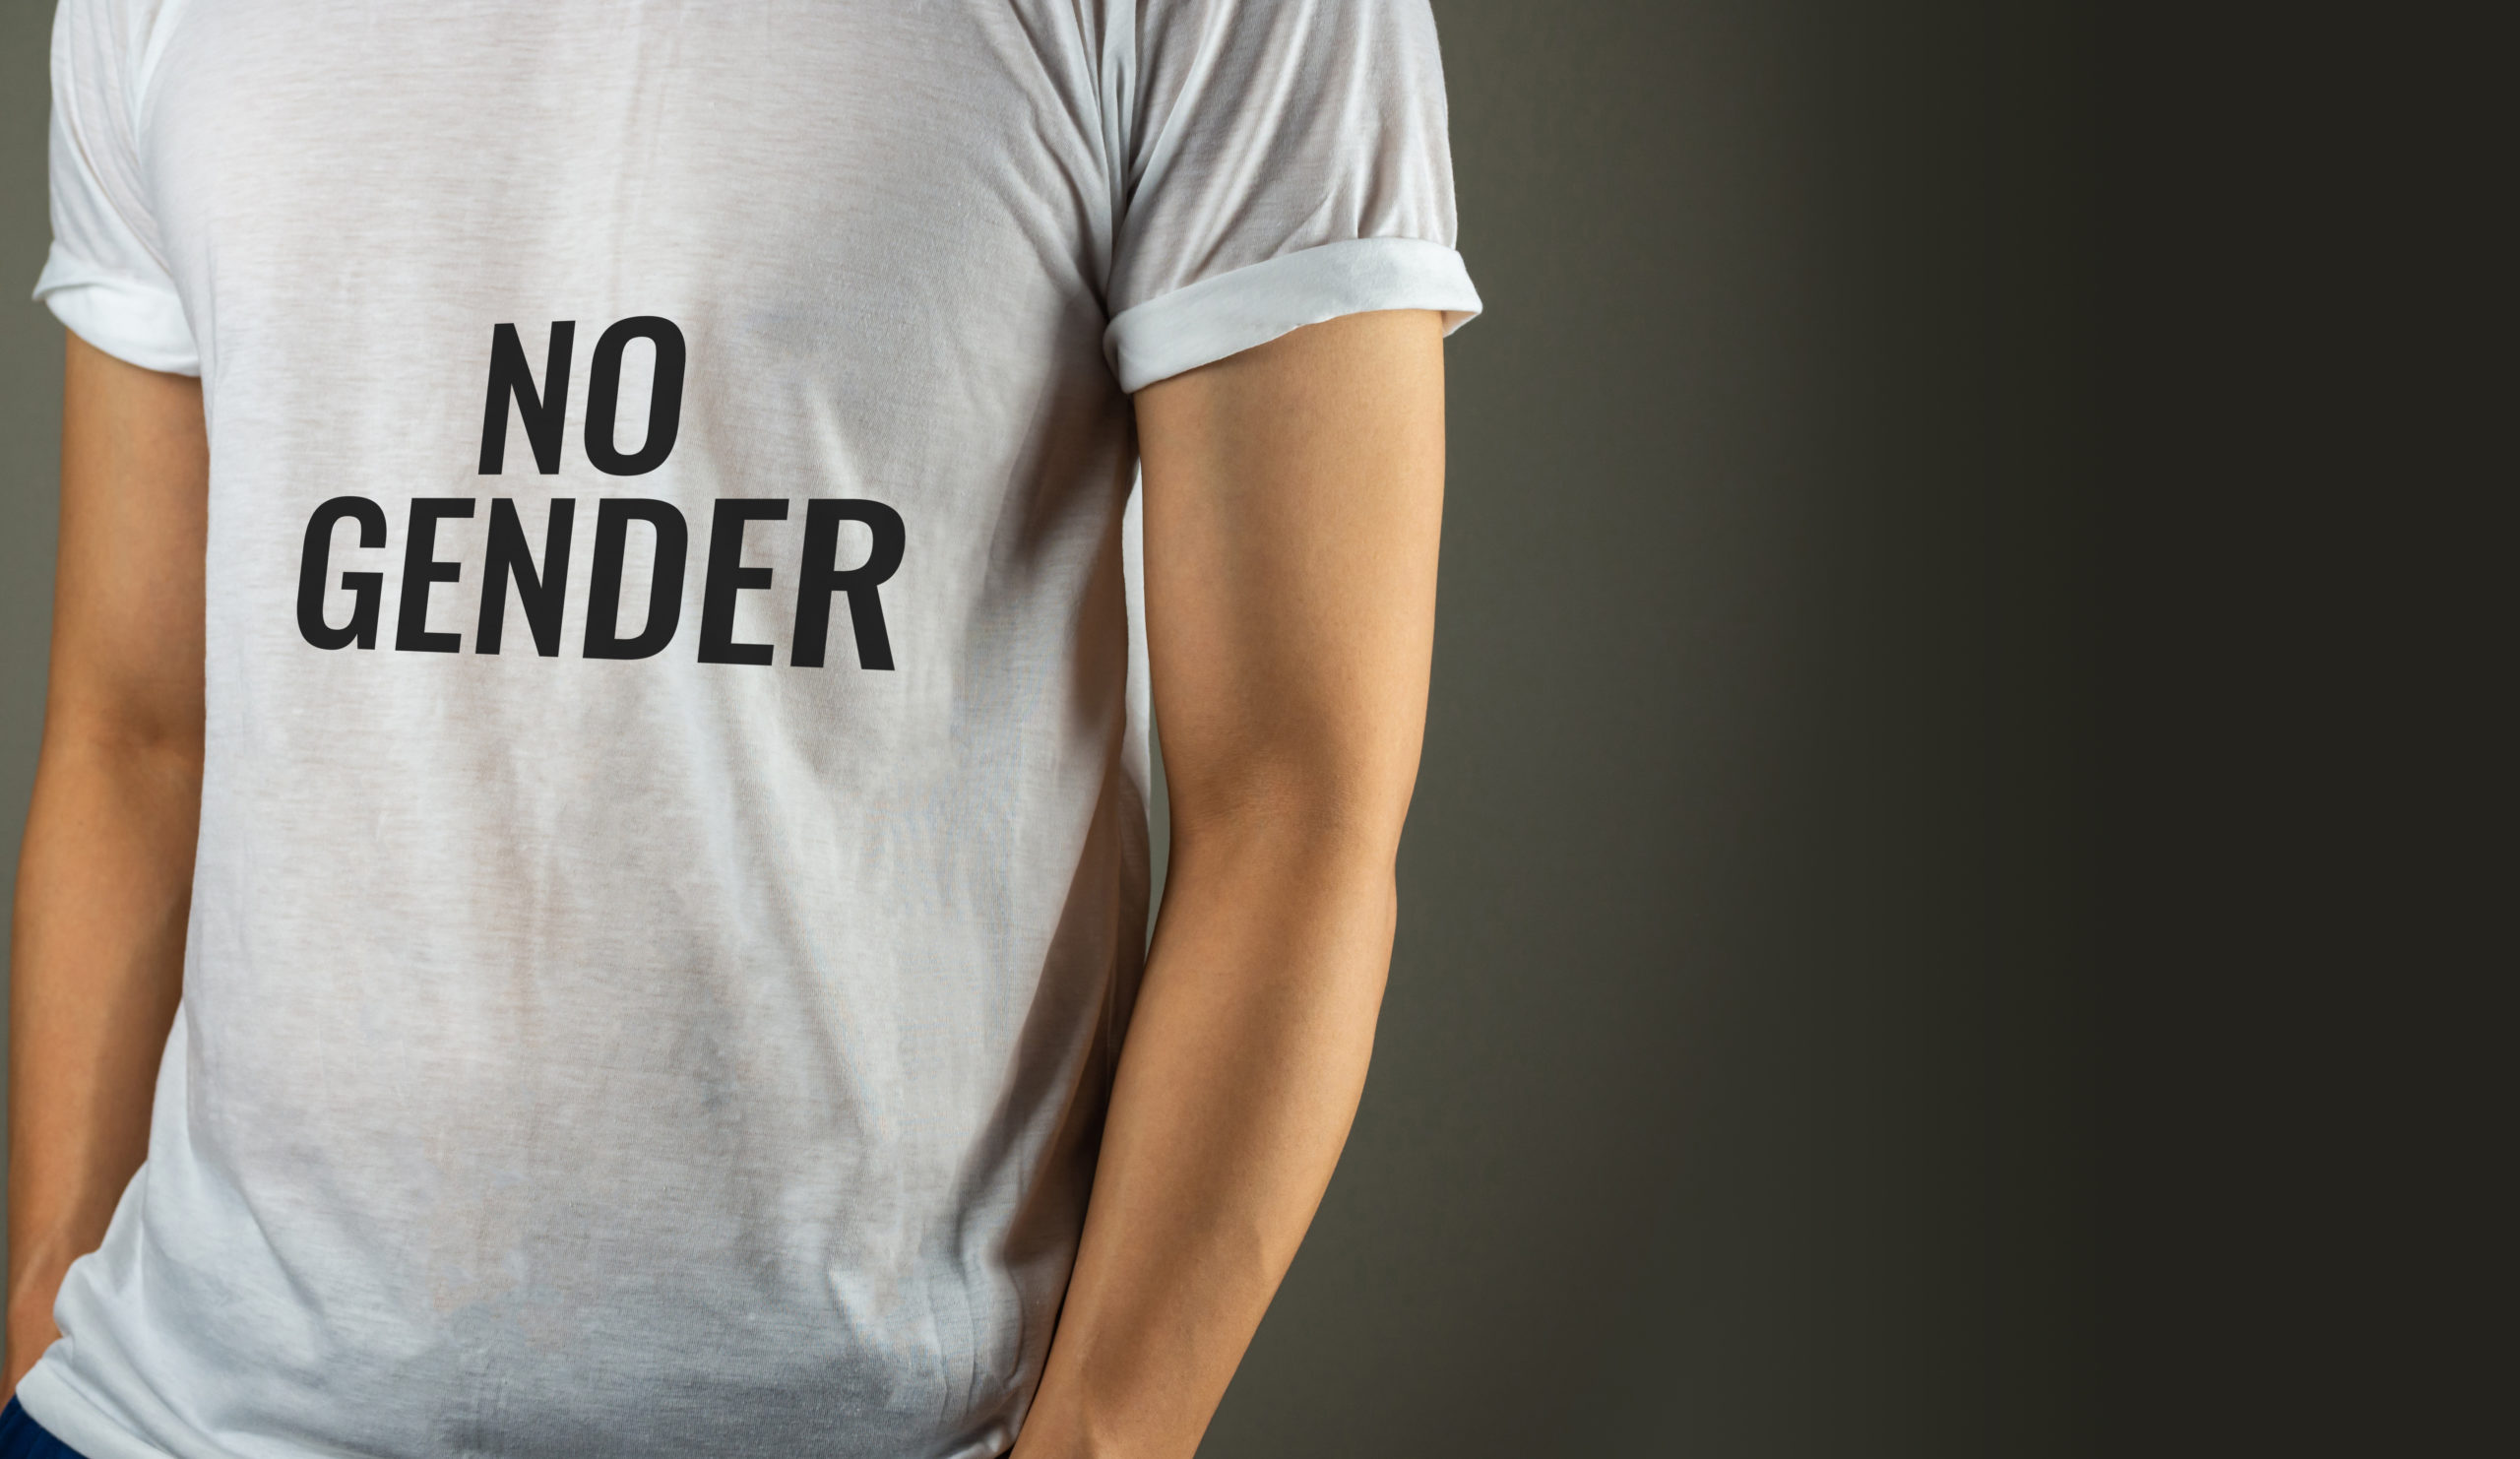 No Gender text on t-shirt on grey background